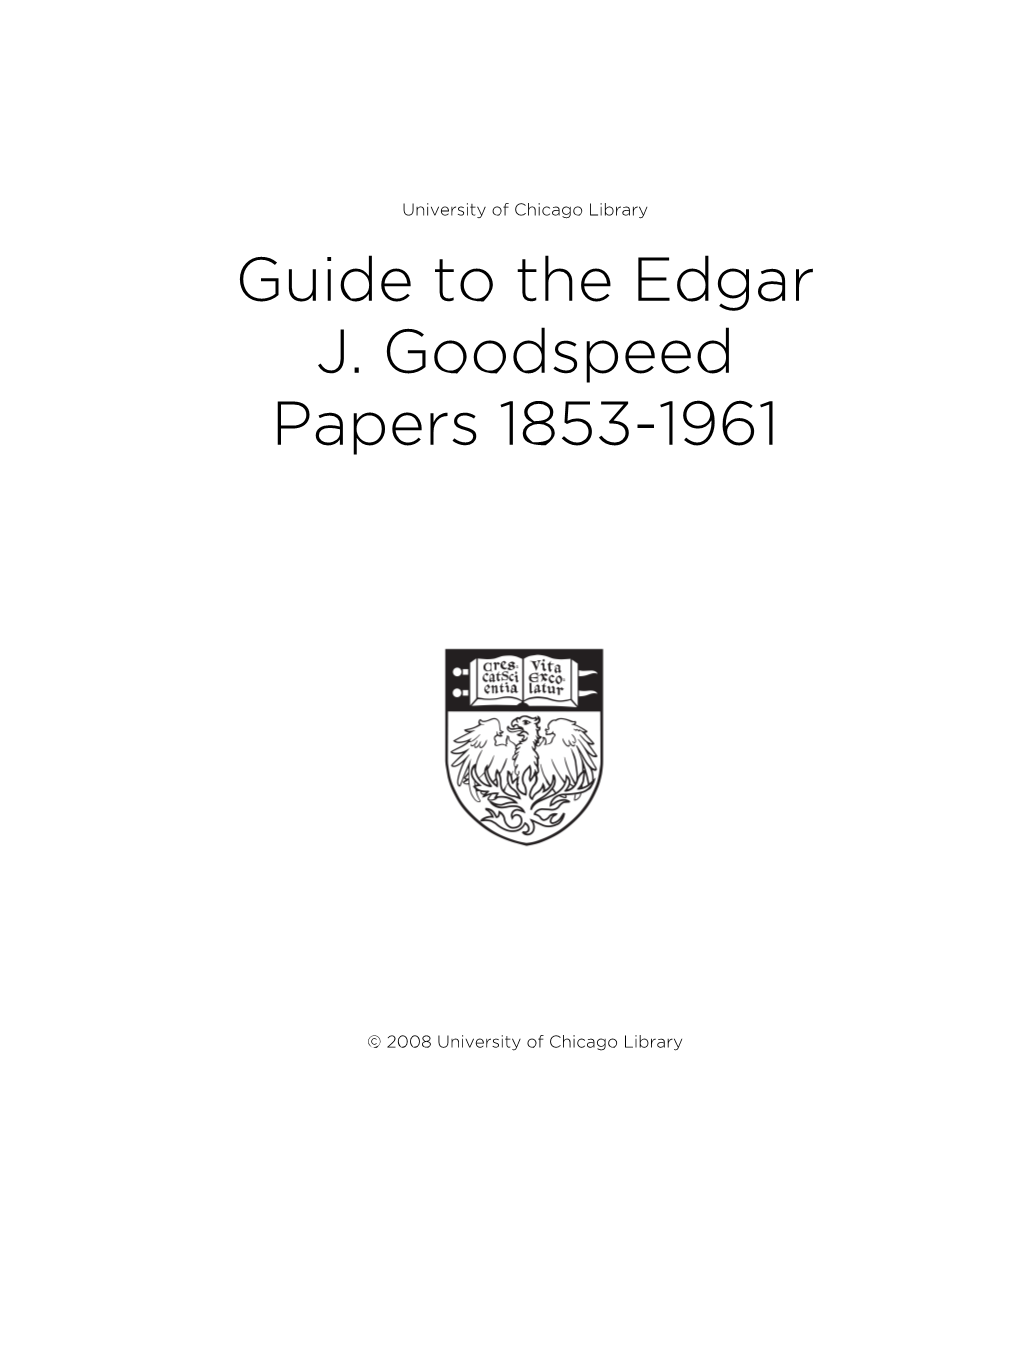 Guide to the Edgar J. Goodspeed Papers 1853-1961